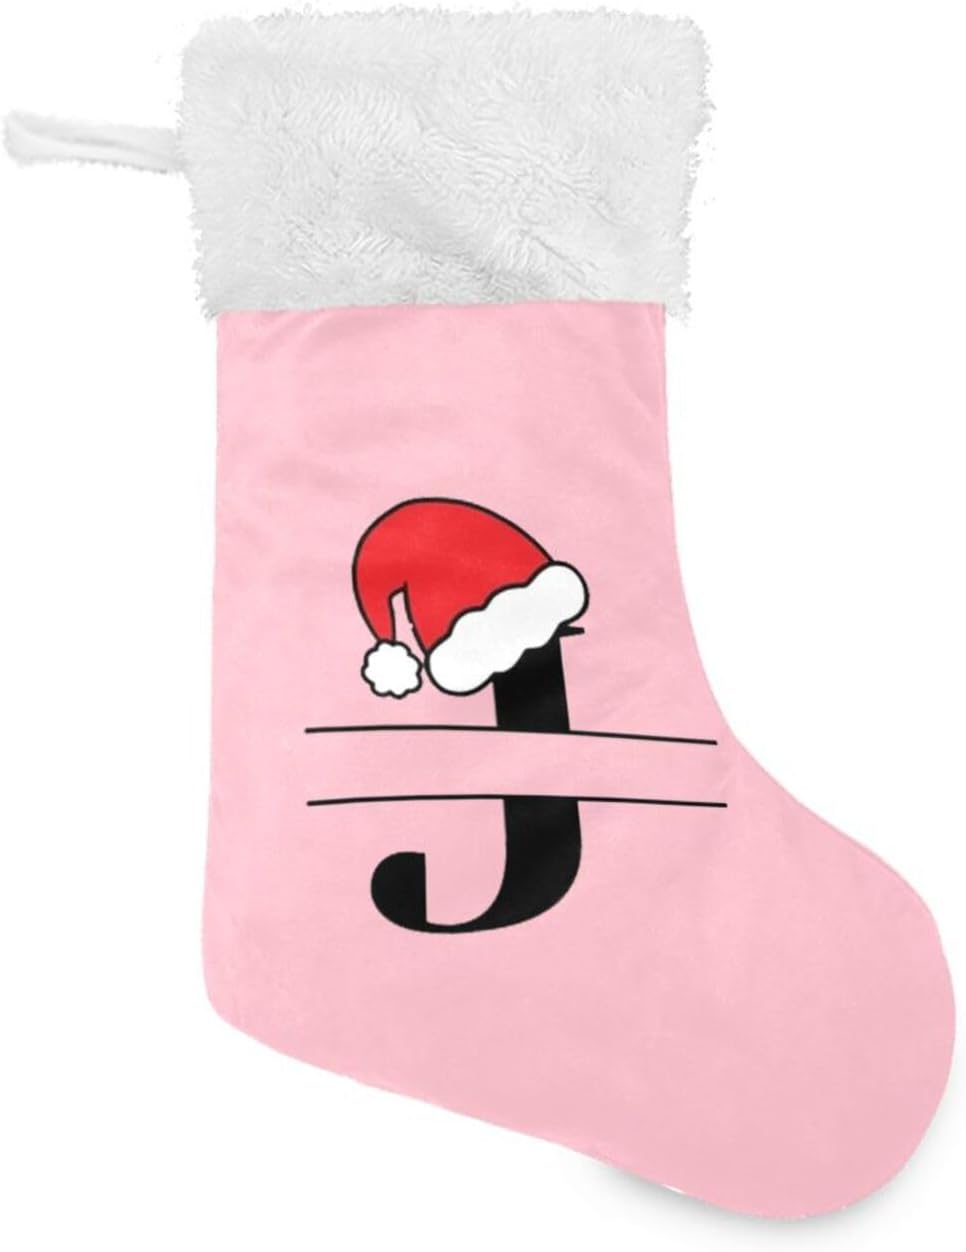 Wellsay Personalized Christmas Stockings 17 inch Customized Christmas ...